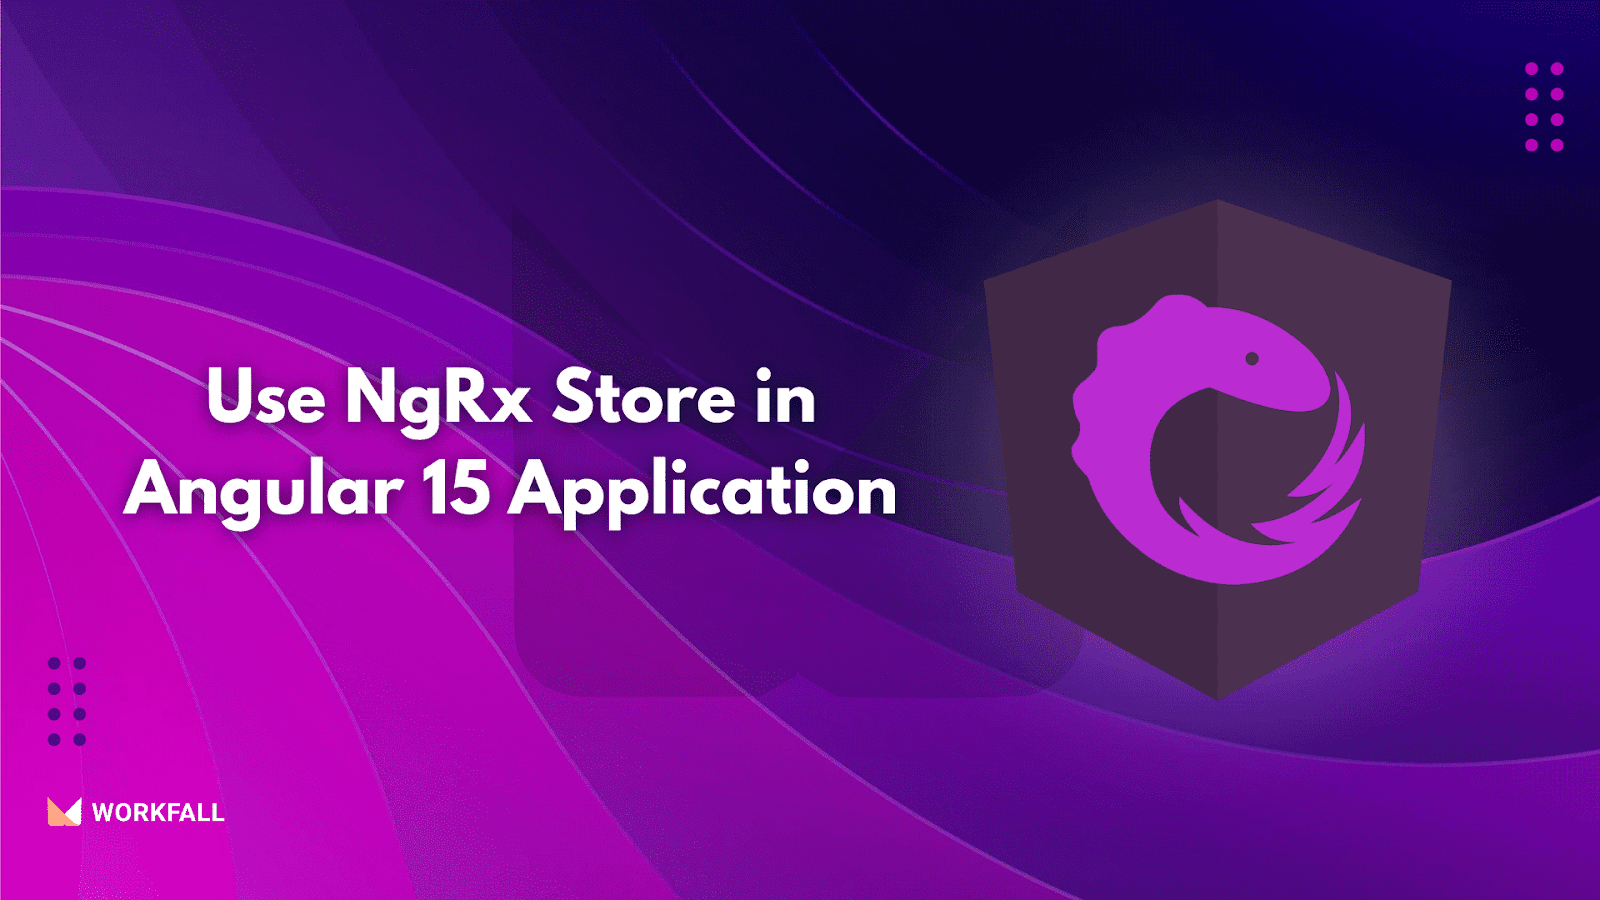 NgRx Store in an Angular 15 Application